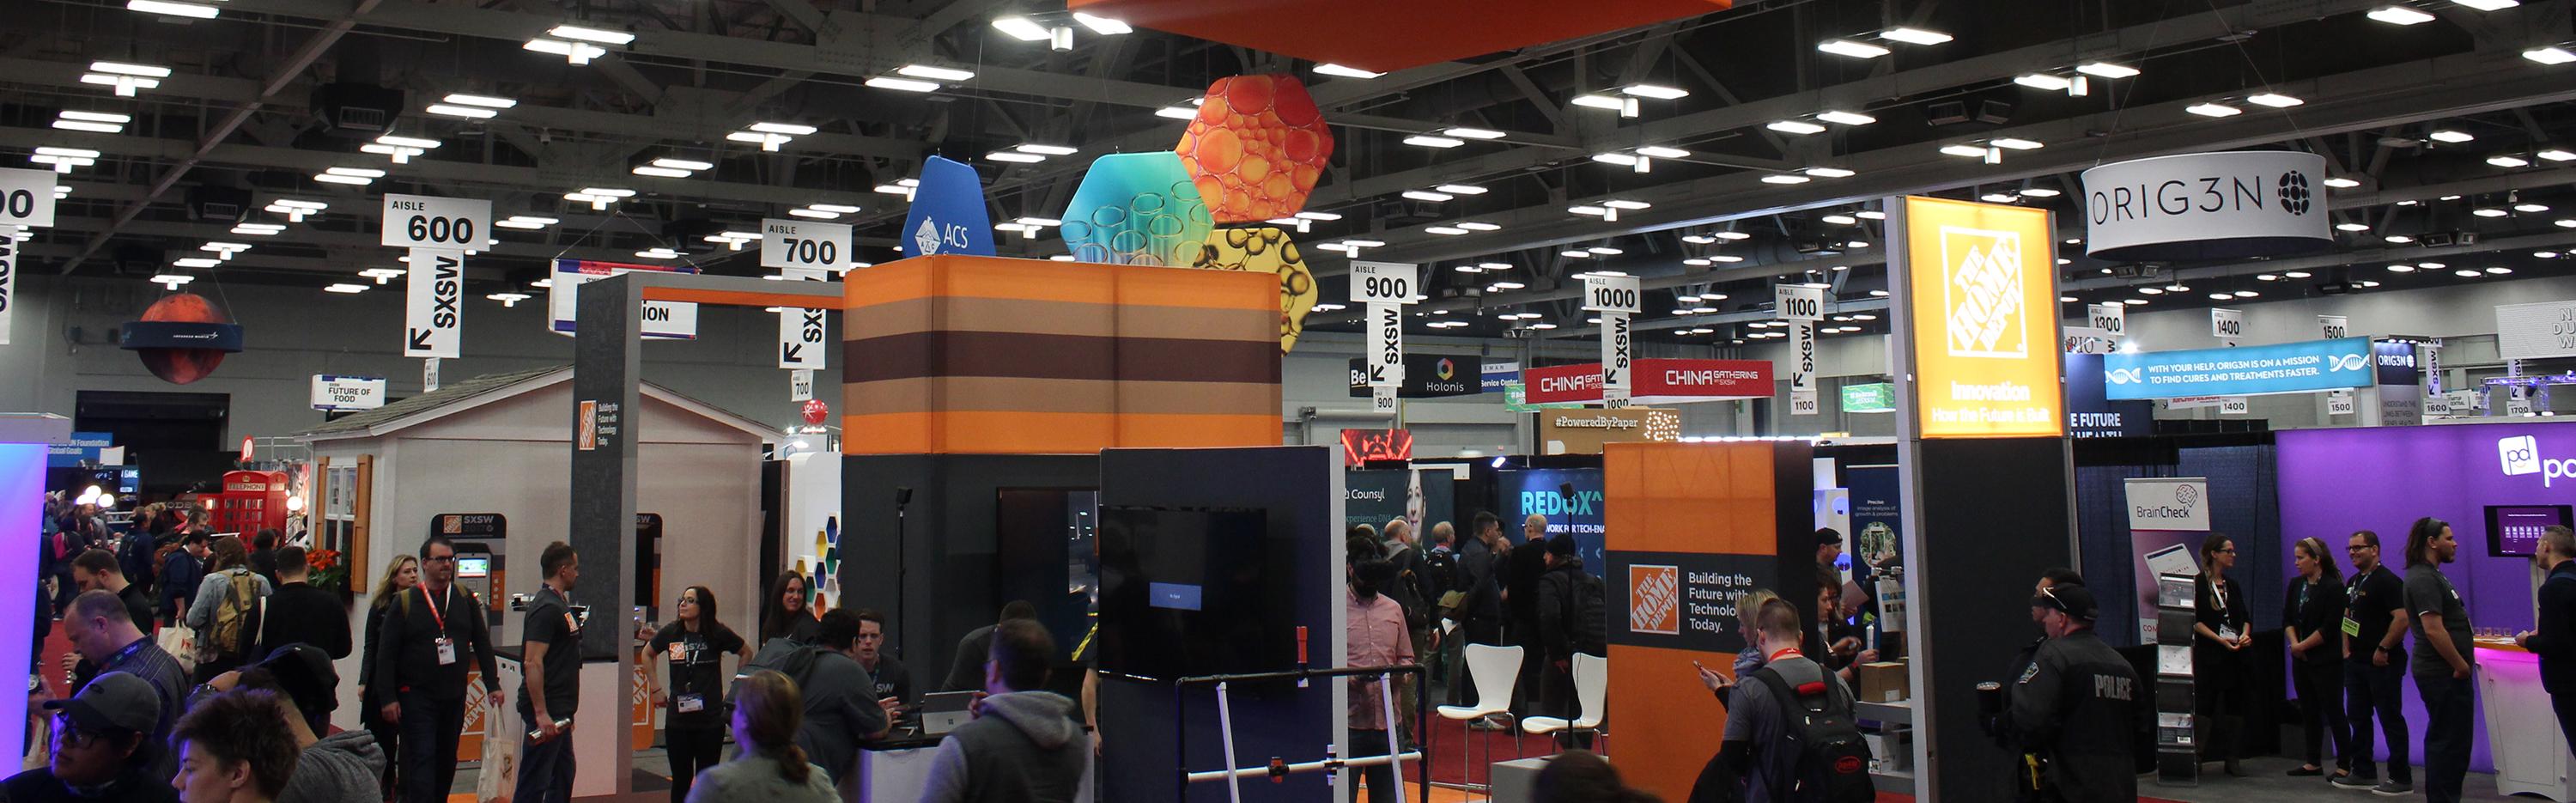 South by Southwest trade show floor